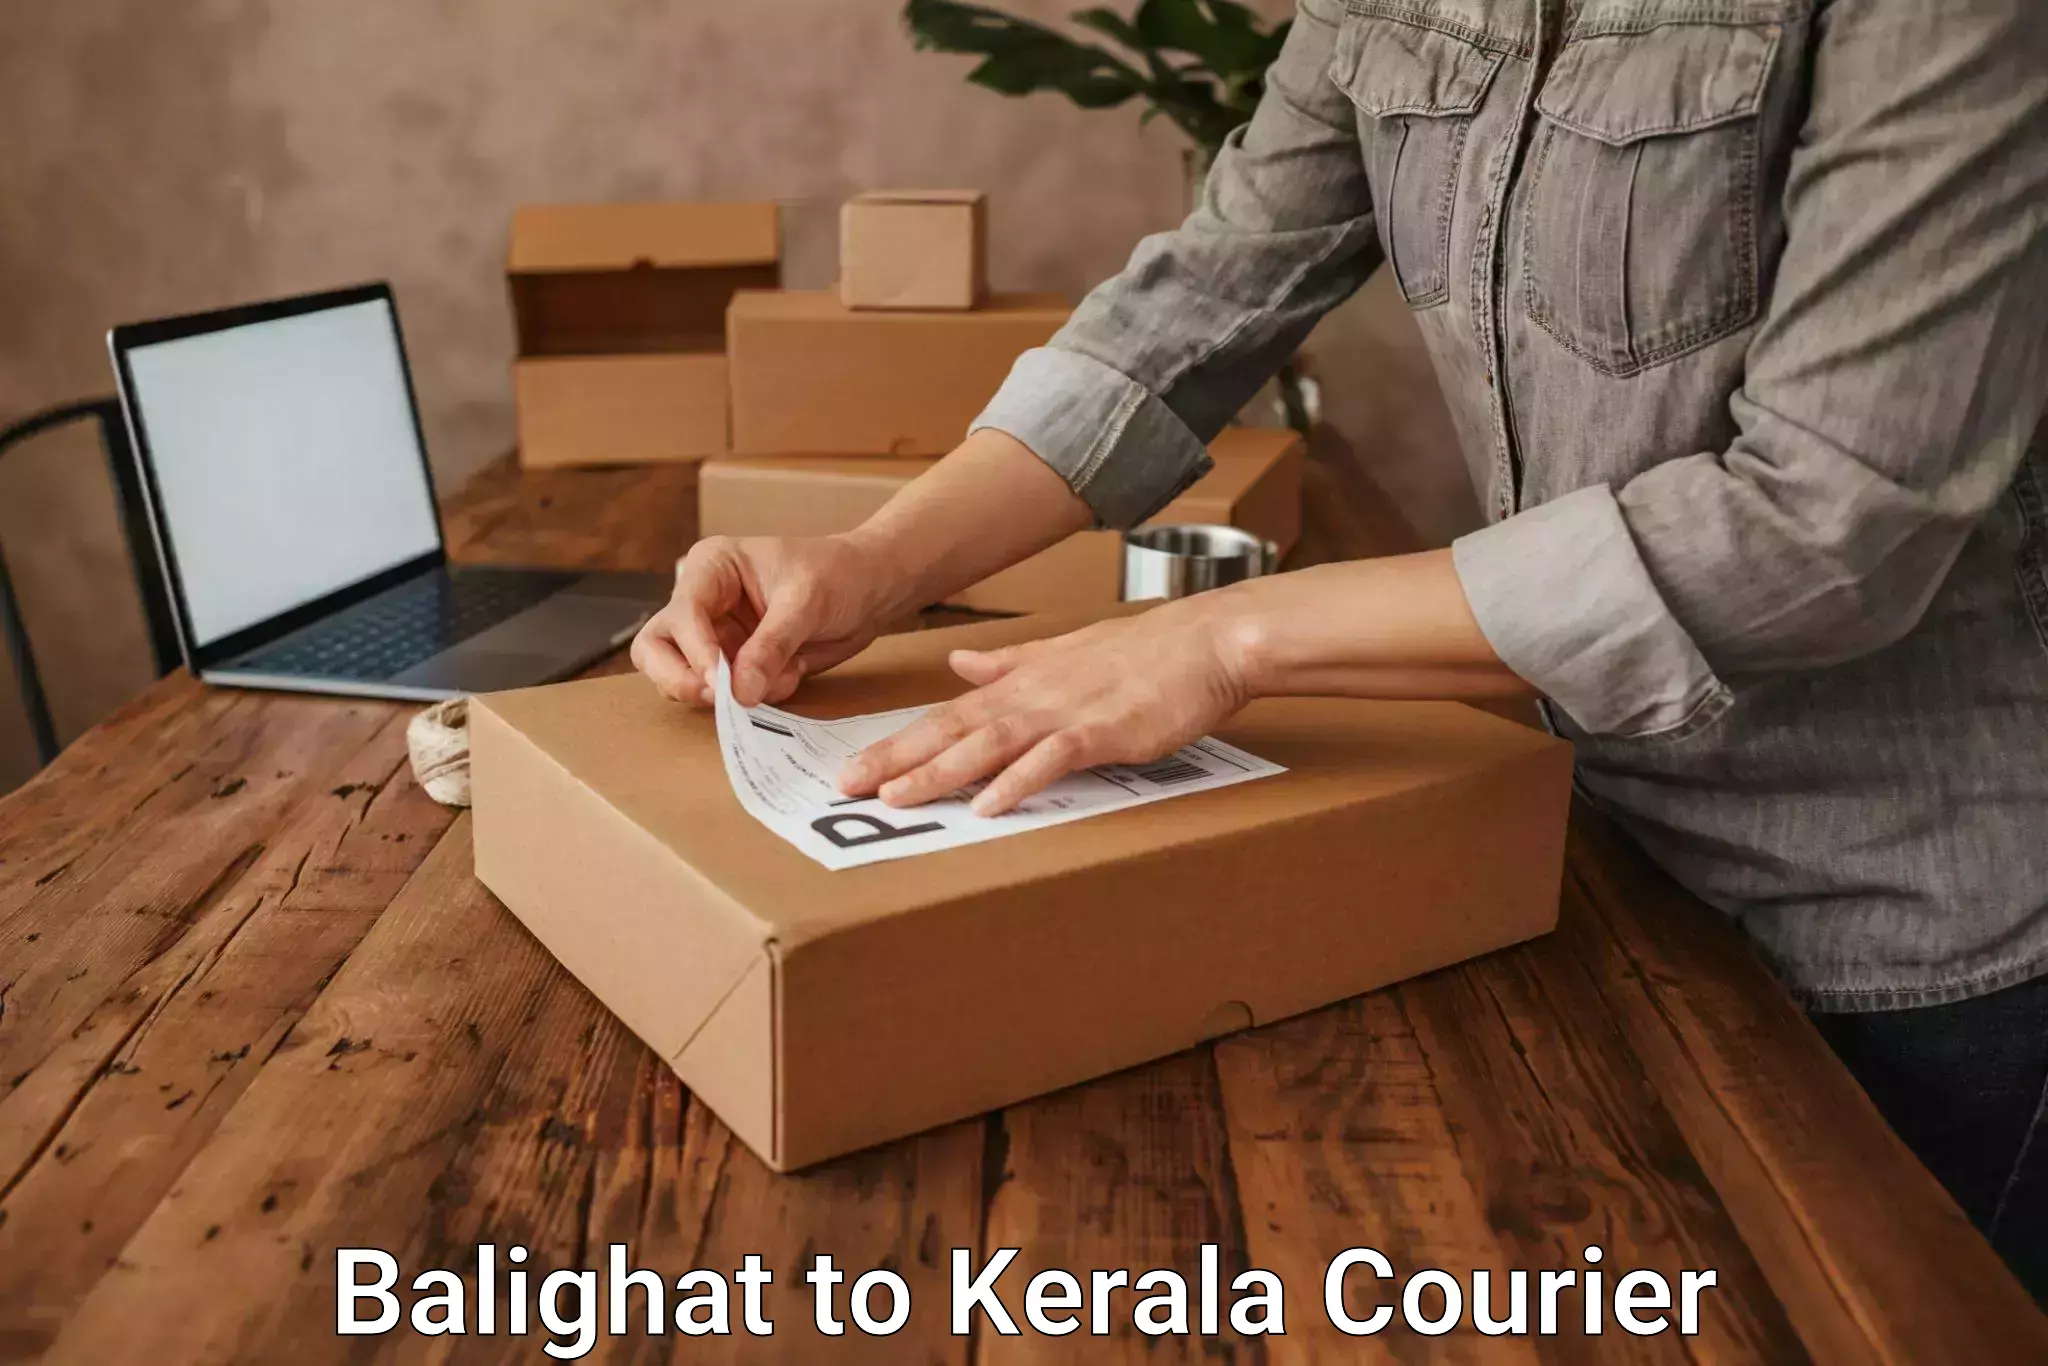 Premium delivery services Balighat to Kochi